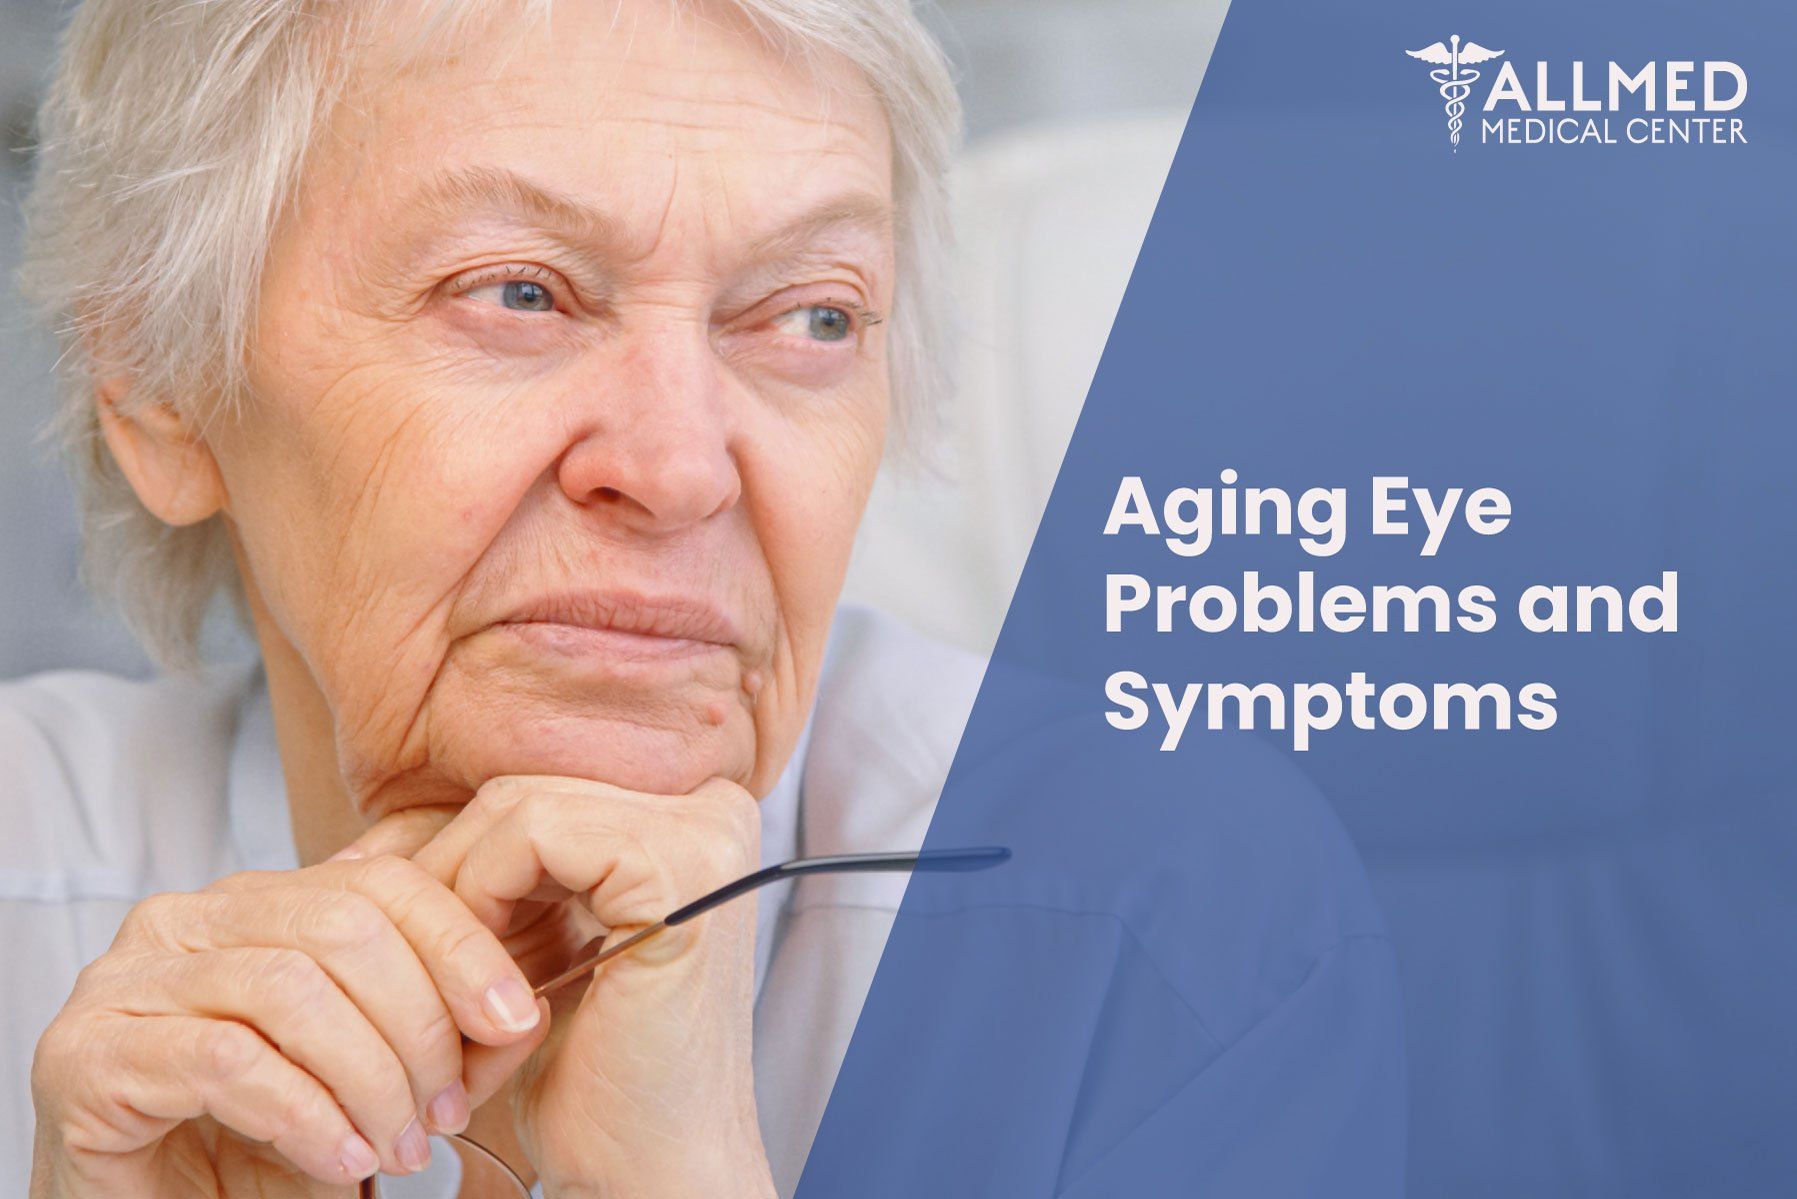 Aging Eye Problems and Symptoms